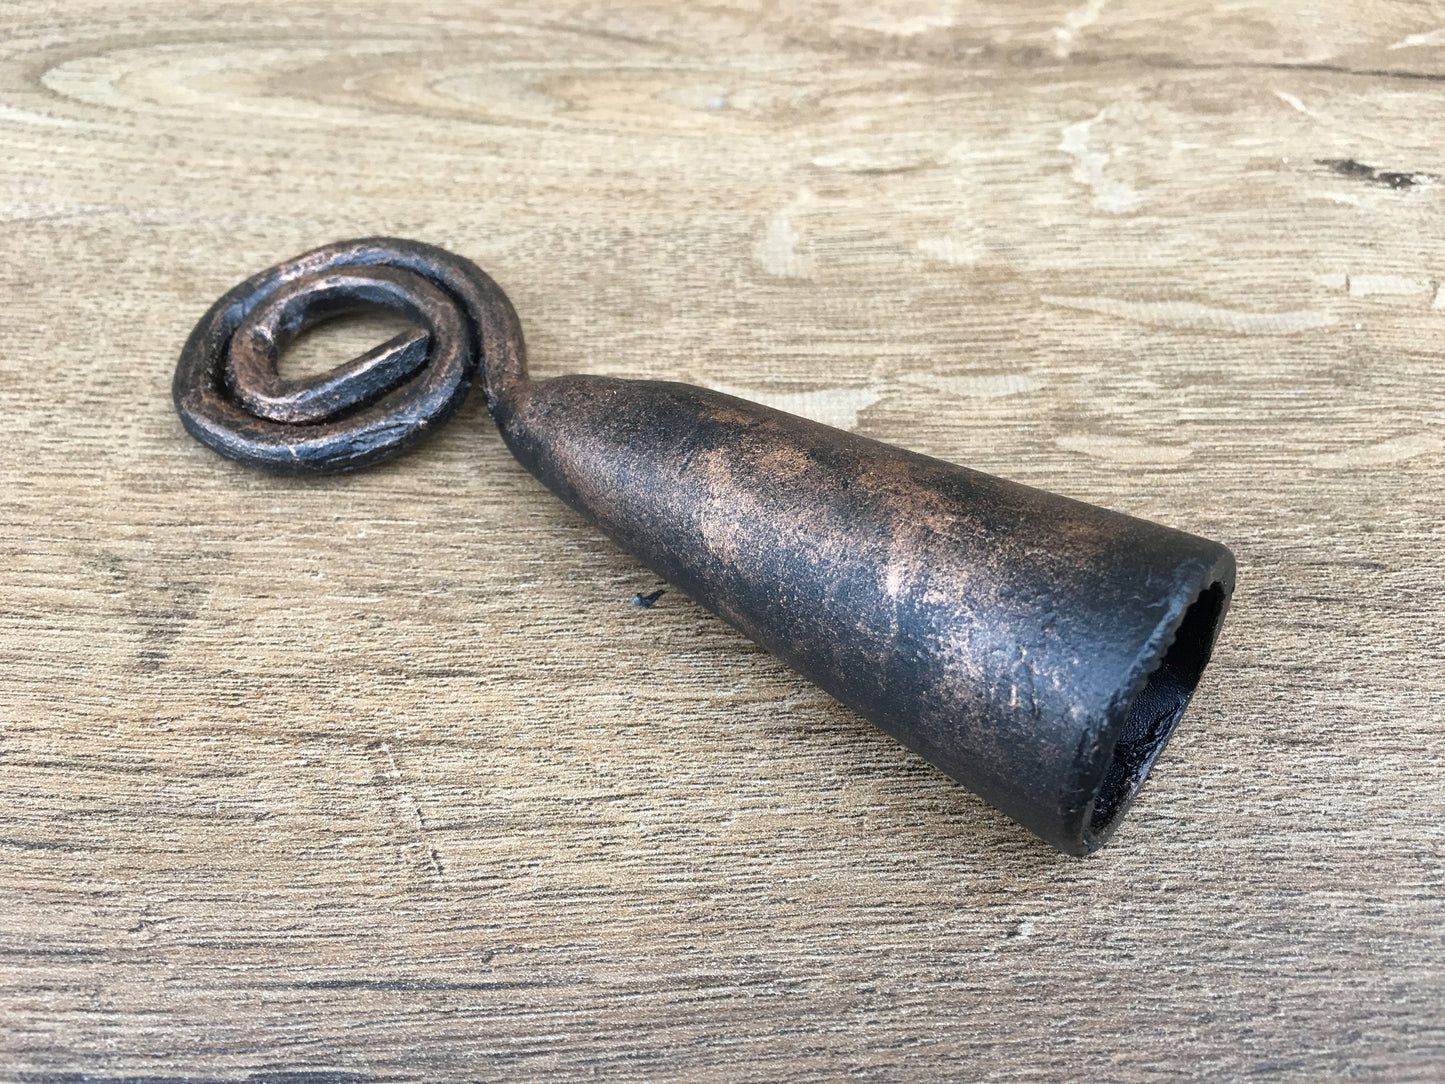 Candle snuffer, candle extinguisher, fire snuffer, flame snuffer,holiday gift,antique snuffer,candle flame snuffer,snuffer decor,candle bell